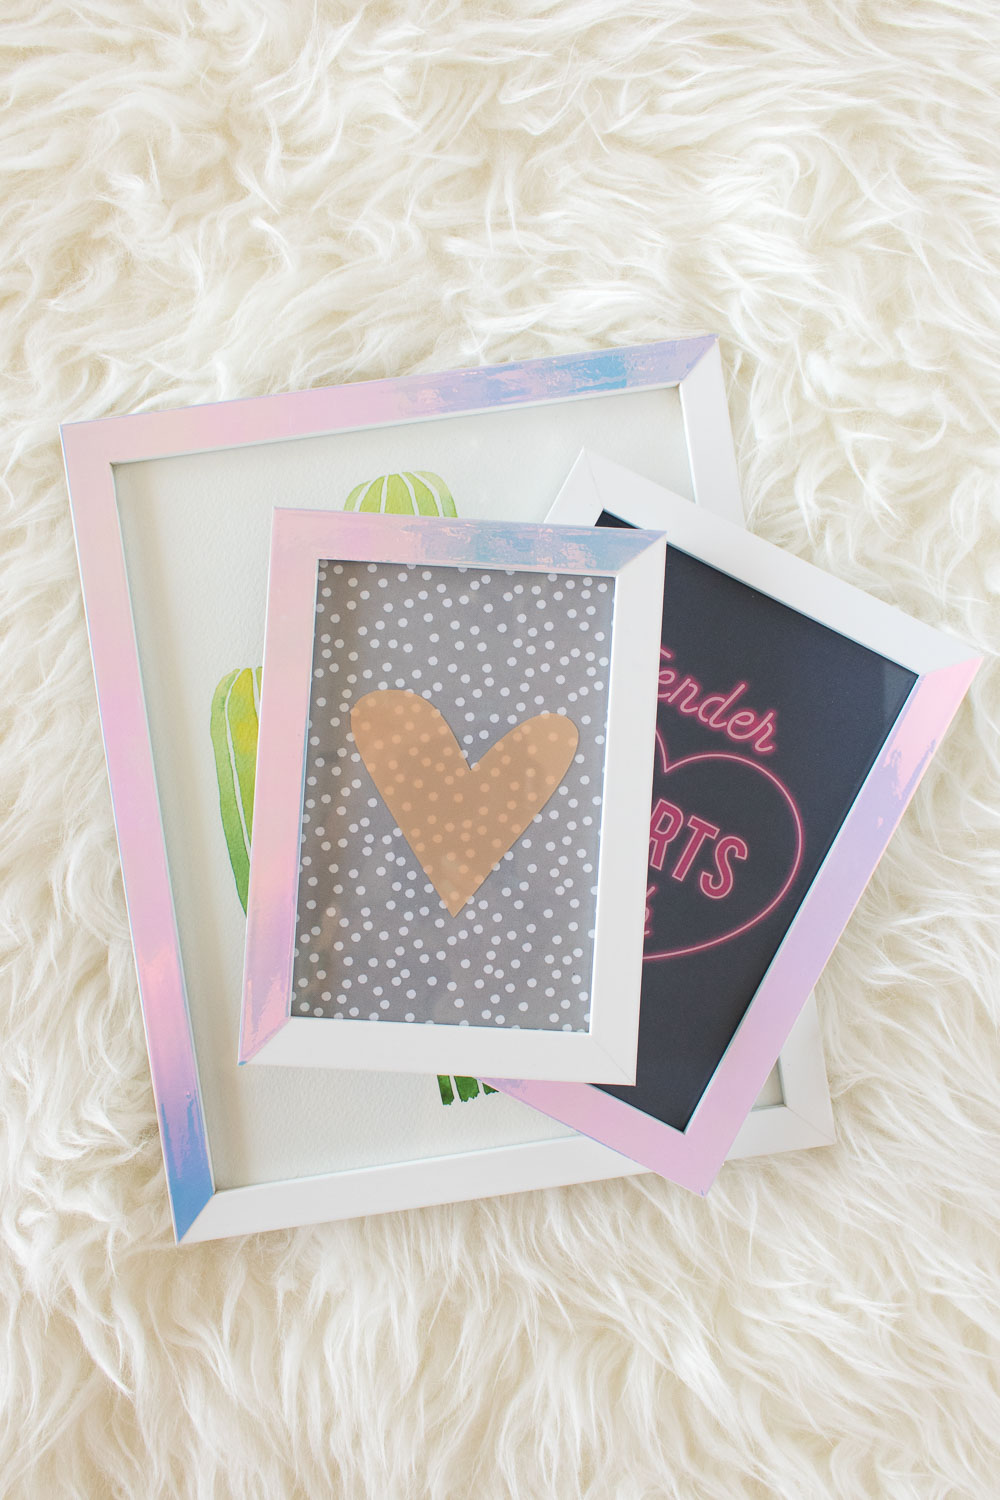 DIY Holographic Photo Frames | Club Crafted